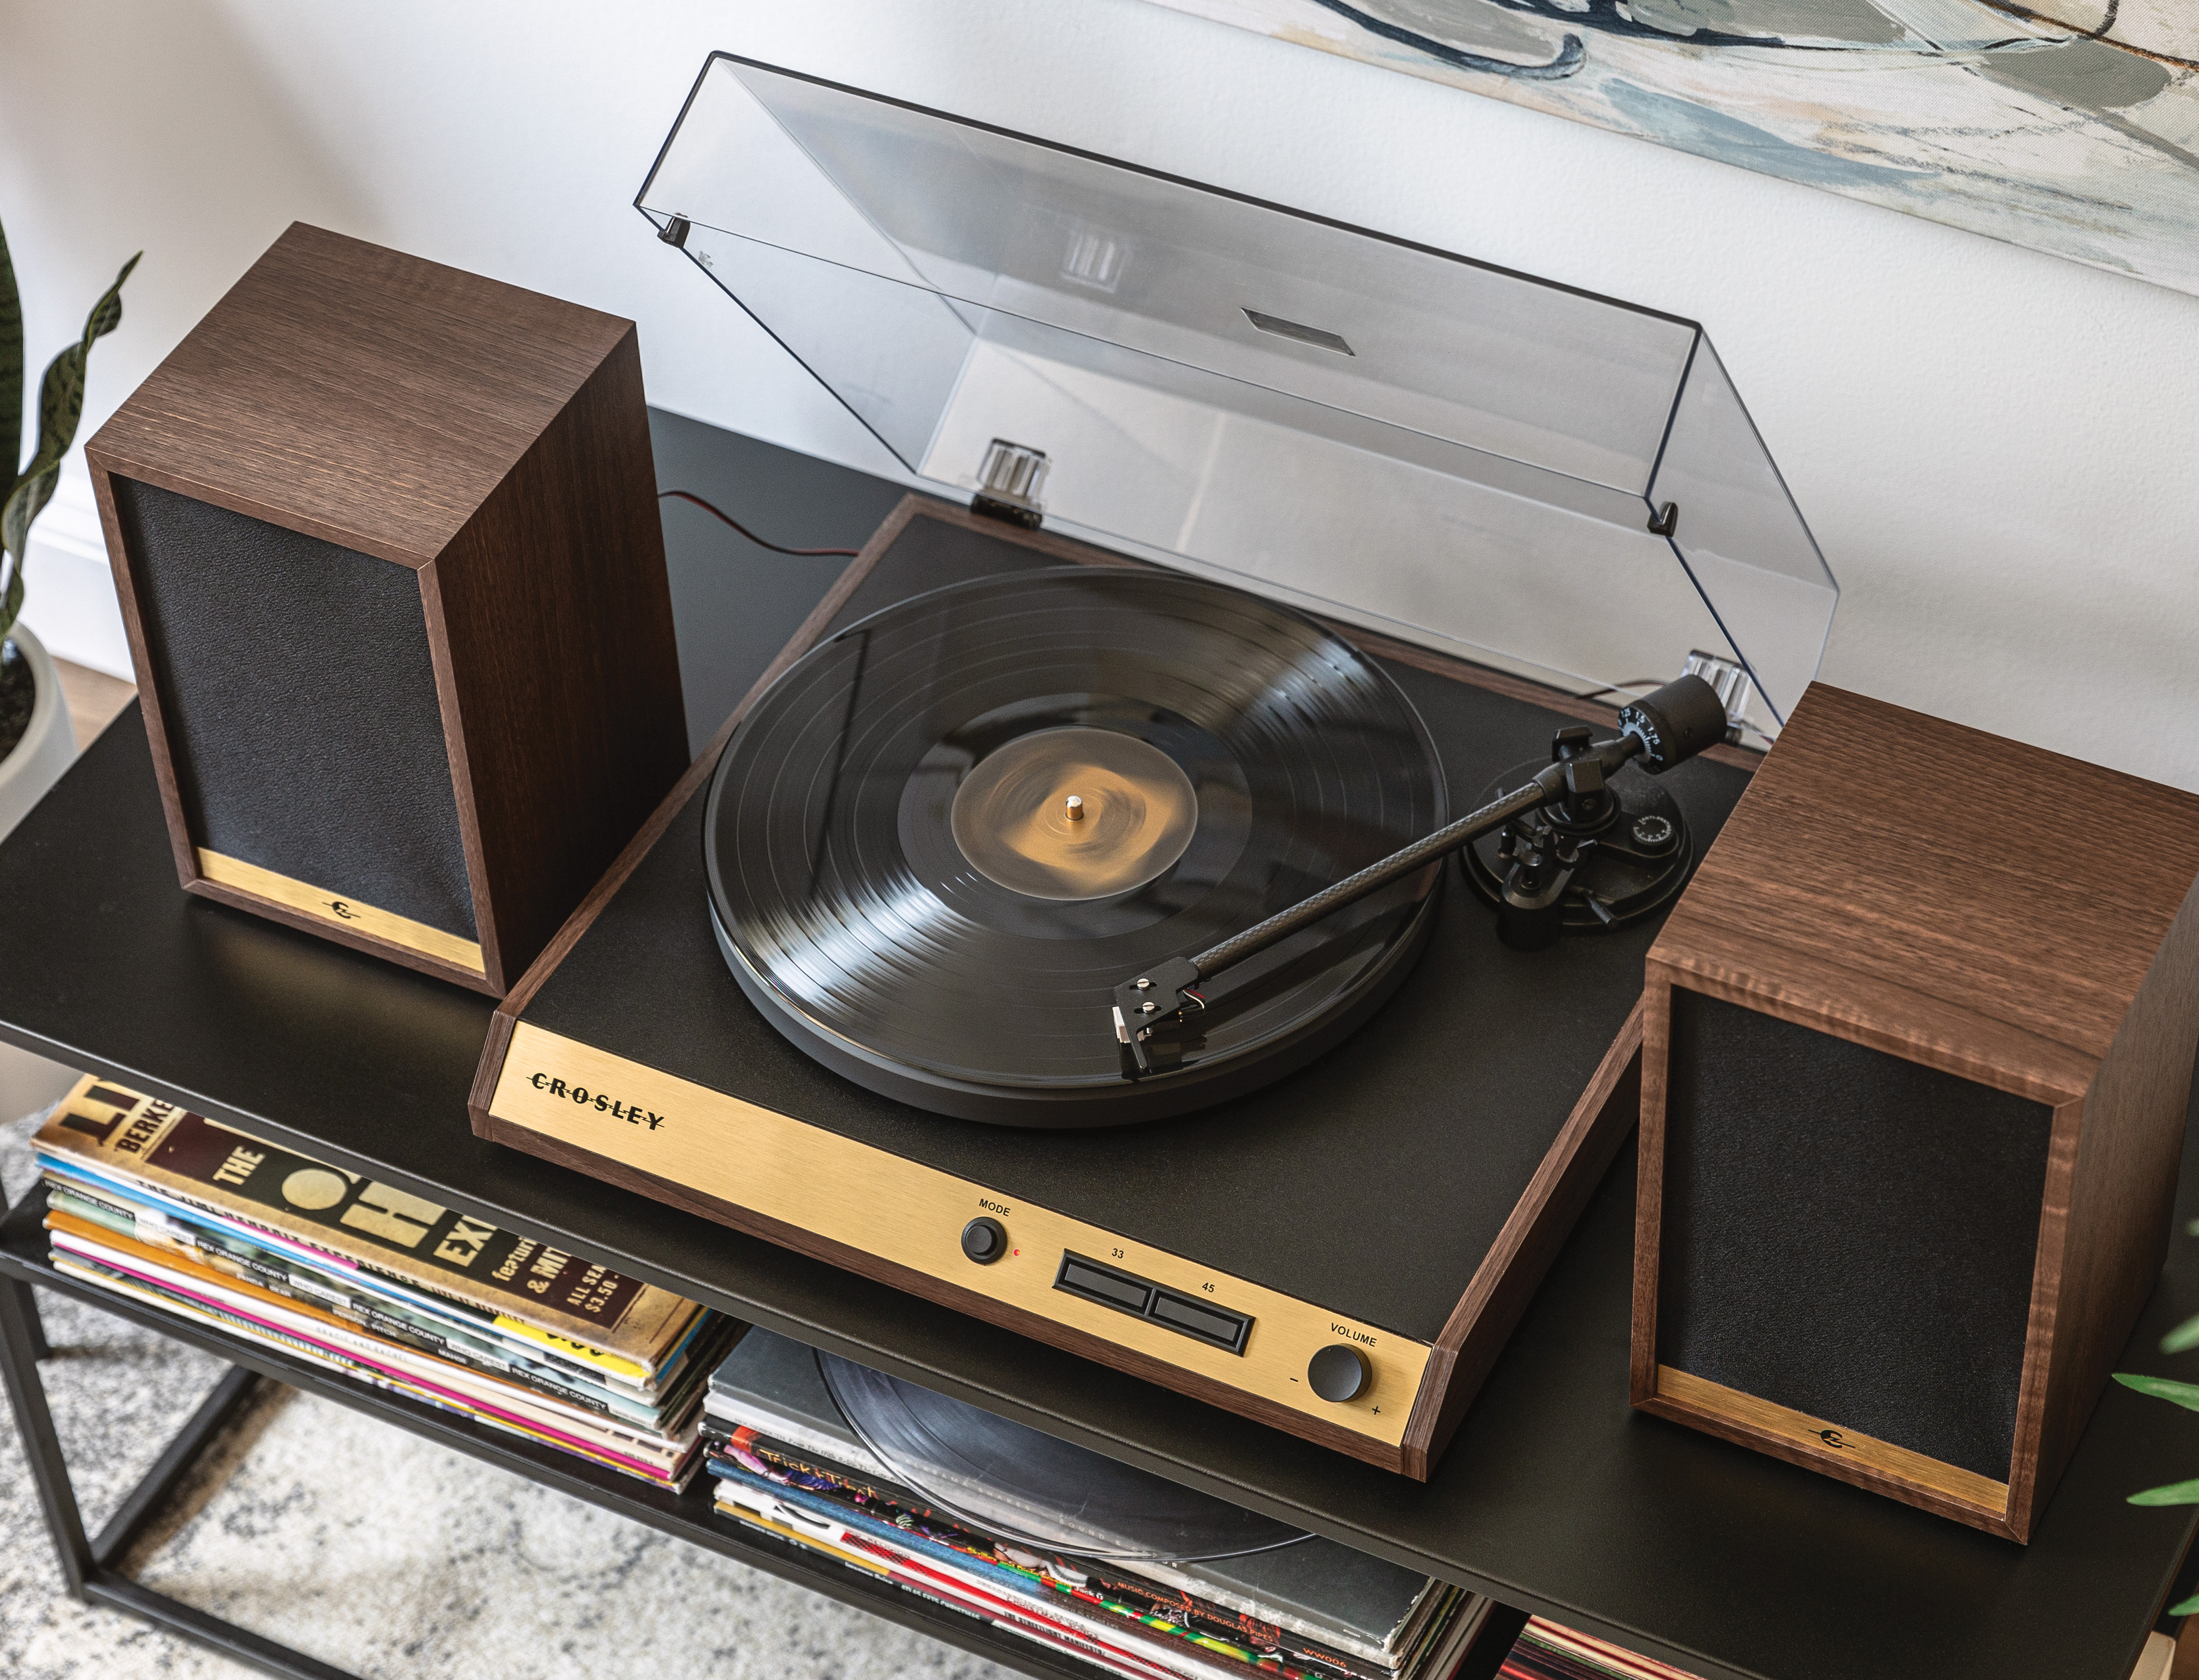 2 - Speed Turntable Decorative Record Player with Bluetooth